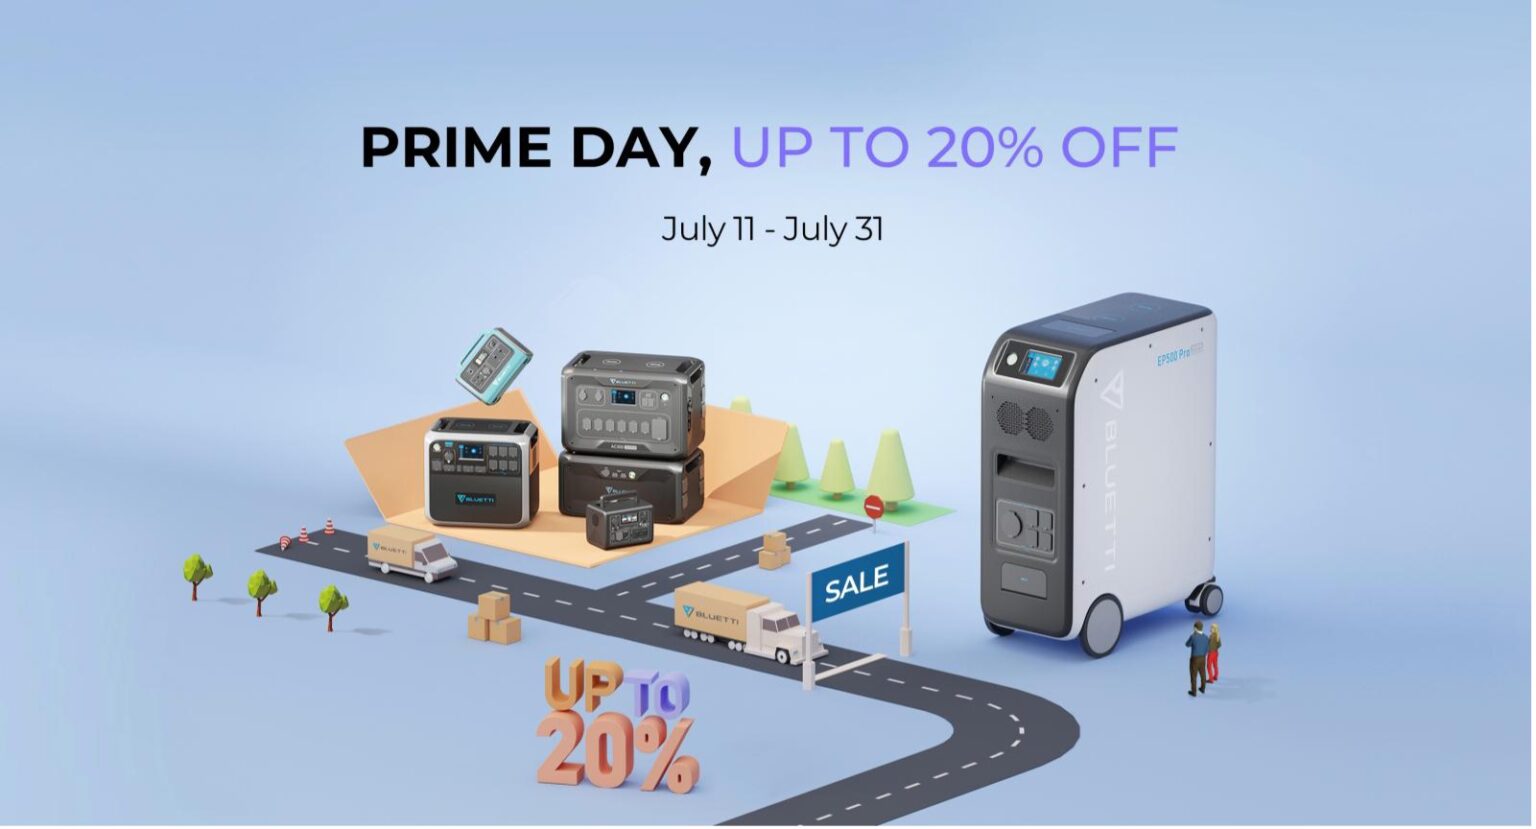 Amazon Prime Day features big deals on Bluetti power products this year.